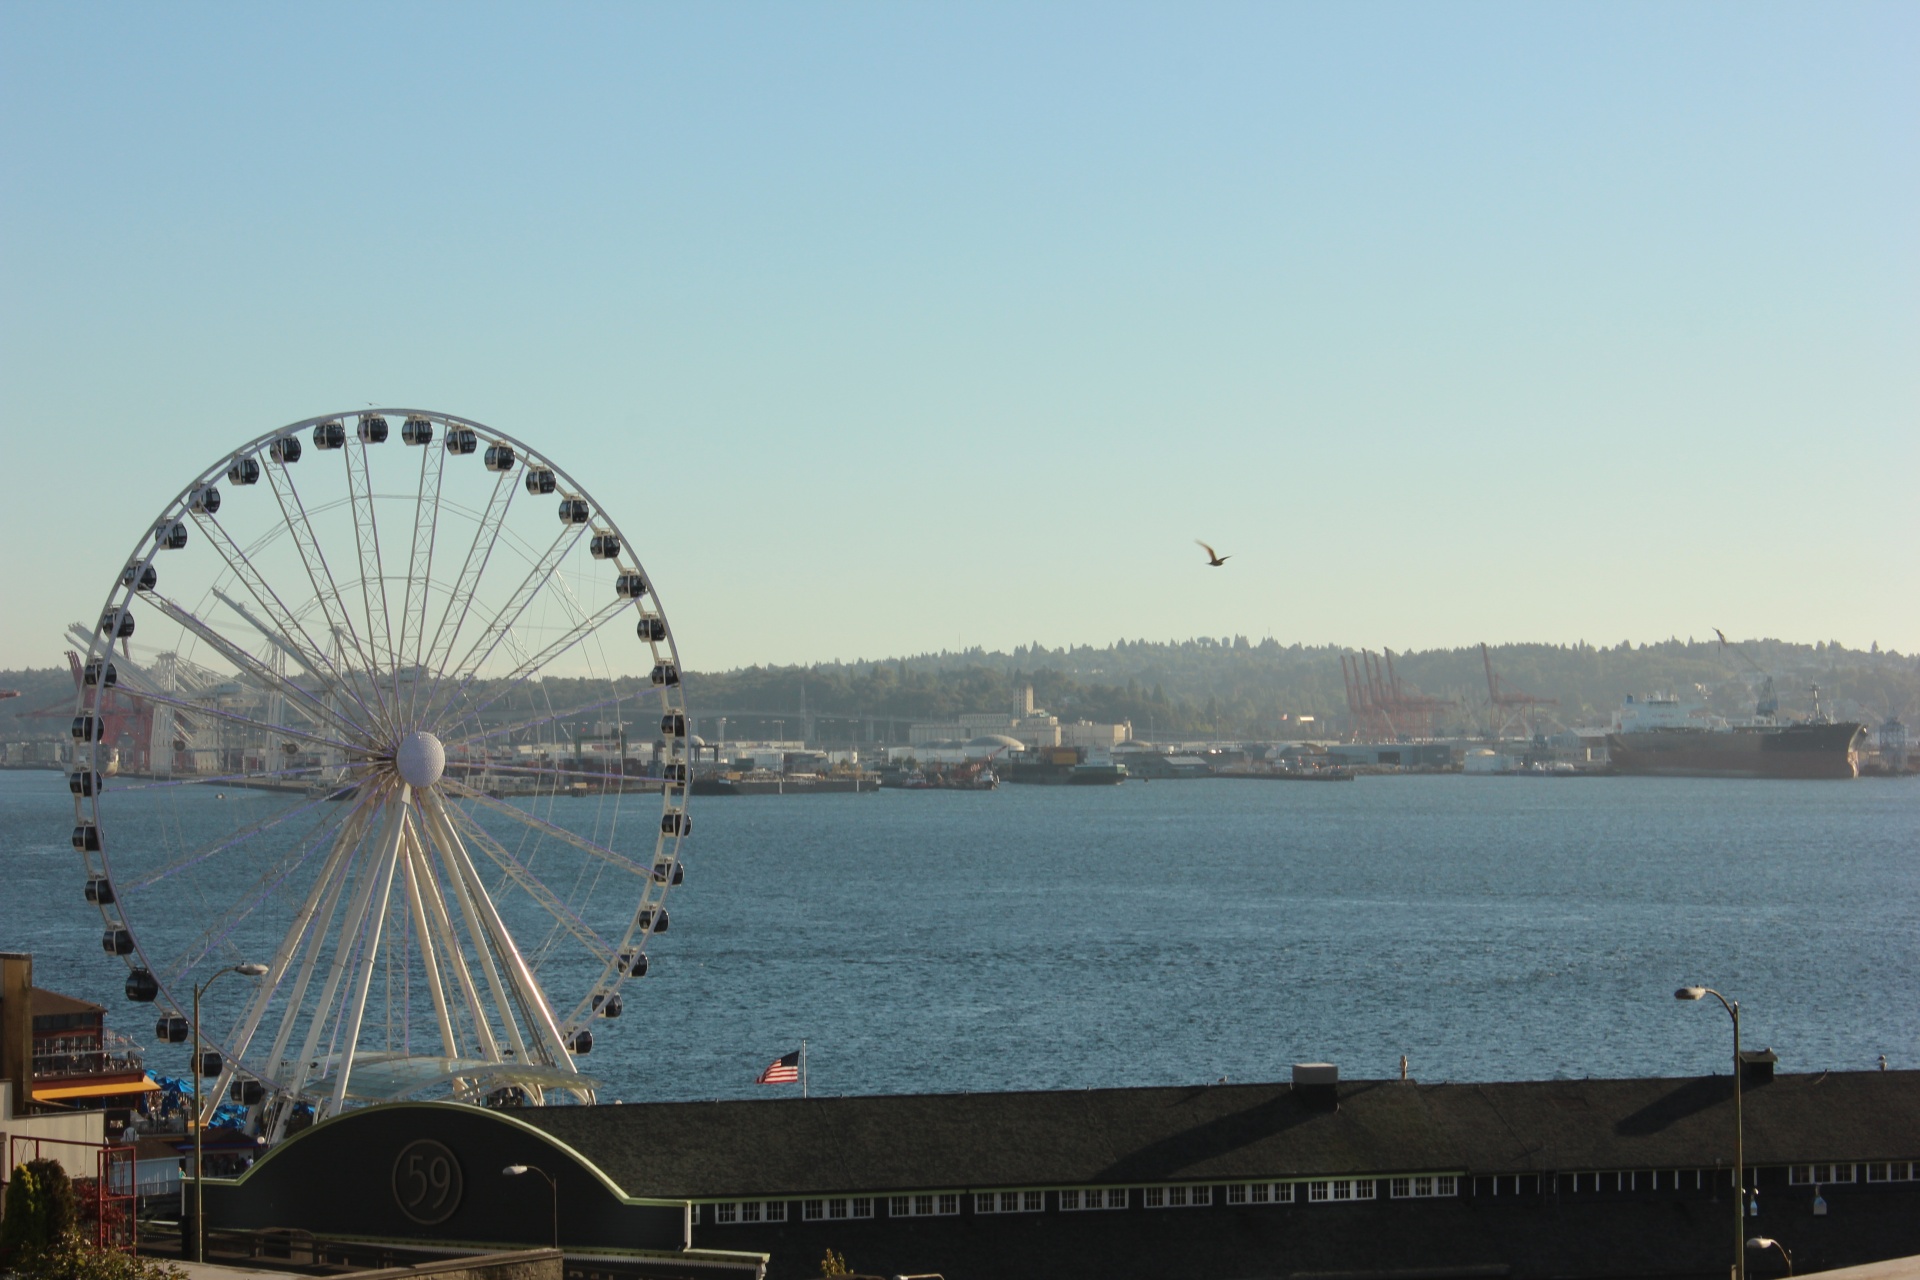 A view of the Seattle Ferris Wheel on the waterfront